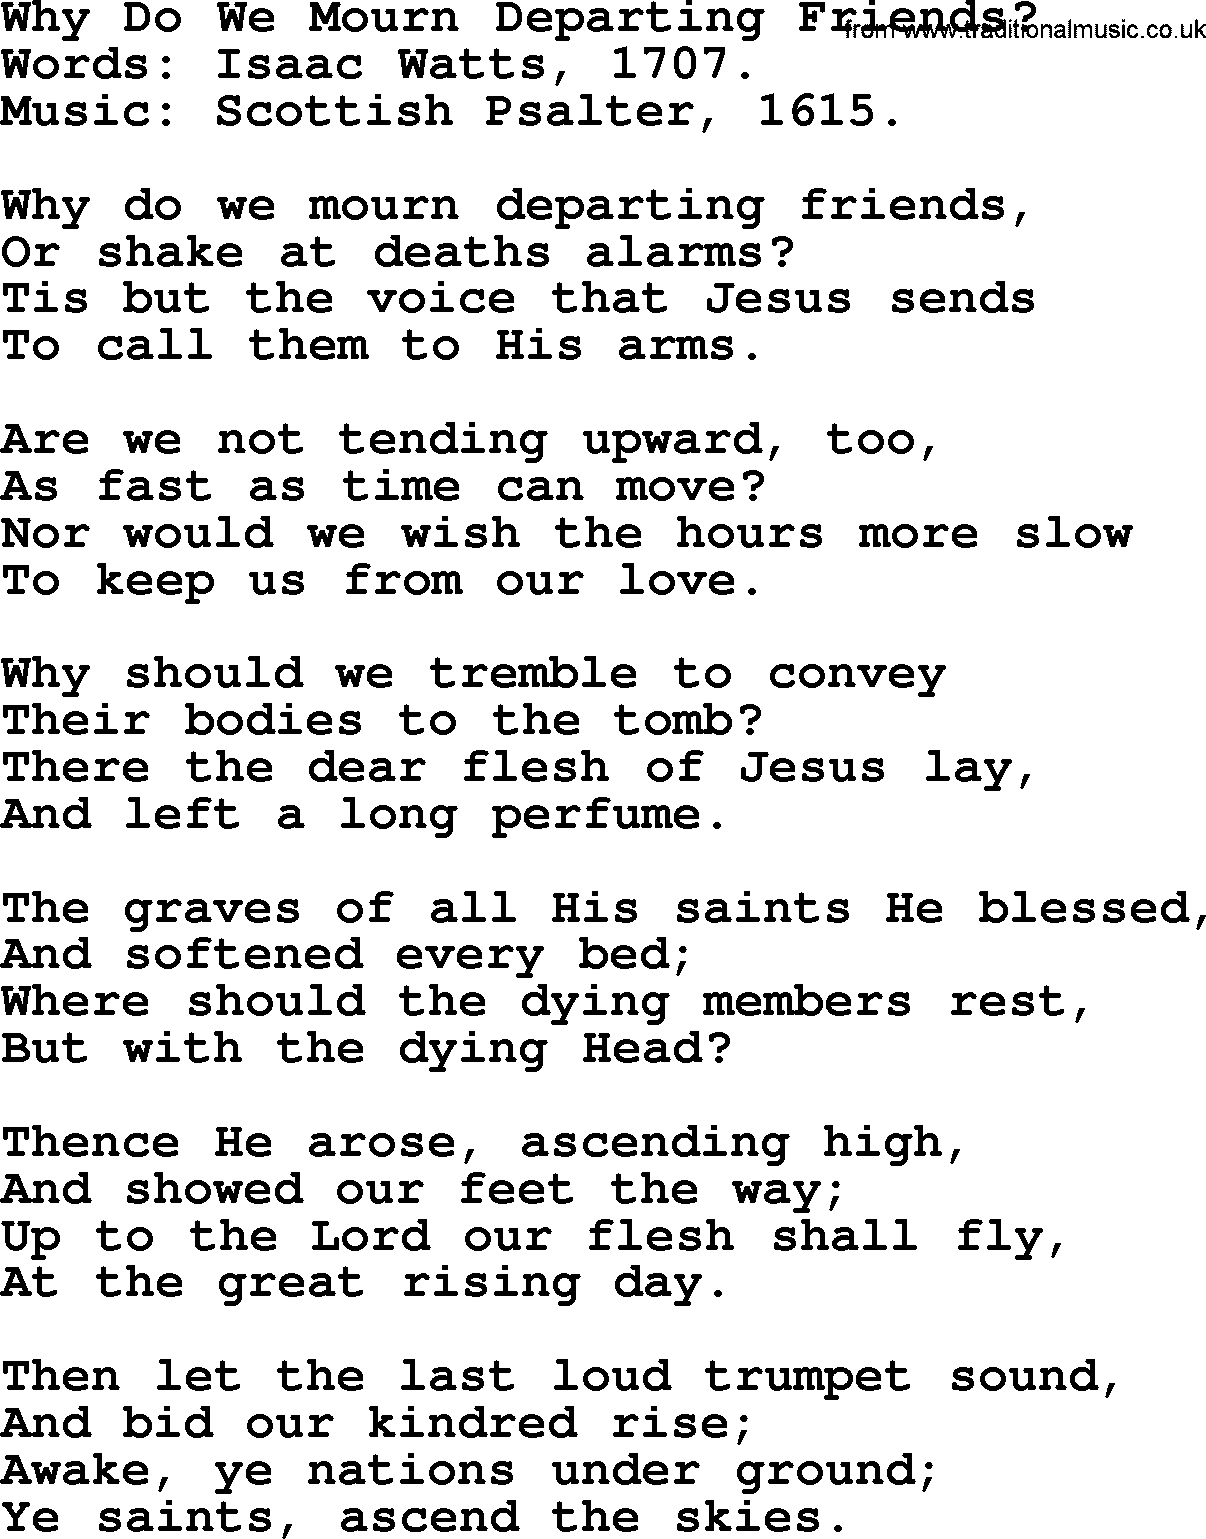 Isaac Watts Christian hymn: Why Do We Mourn Departing Friends_- lyricss